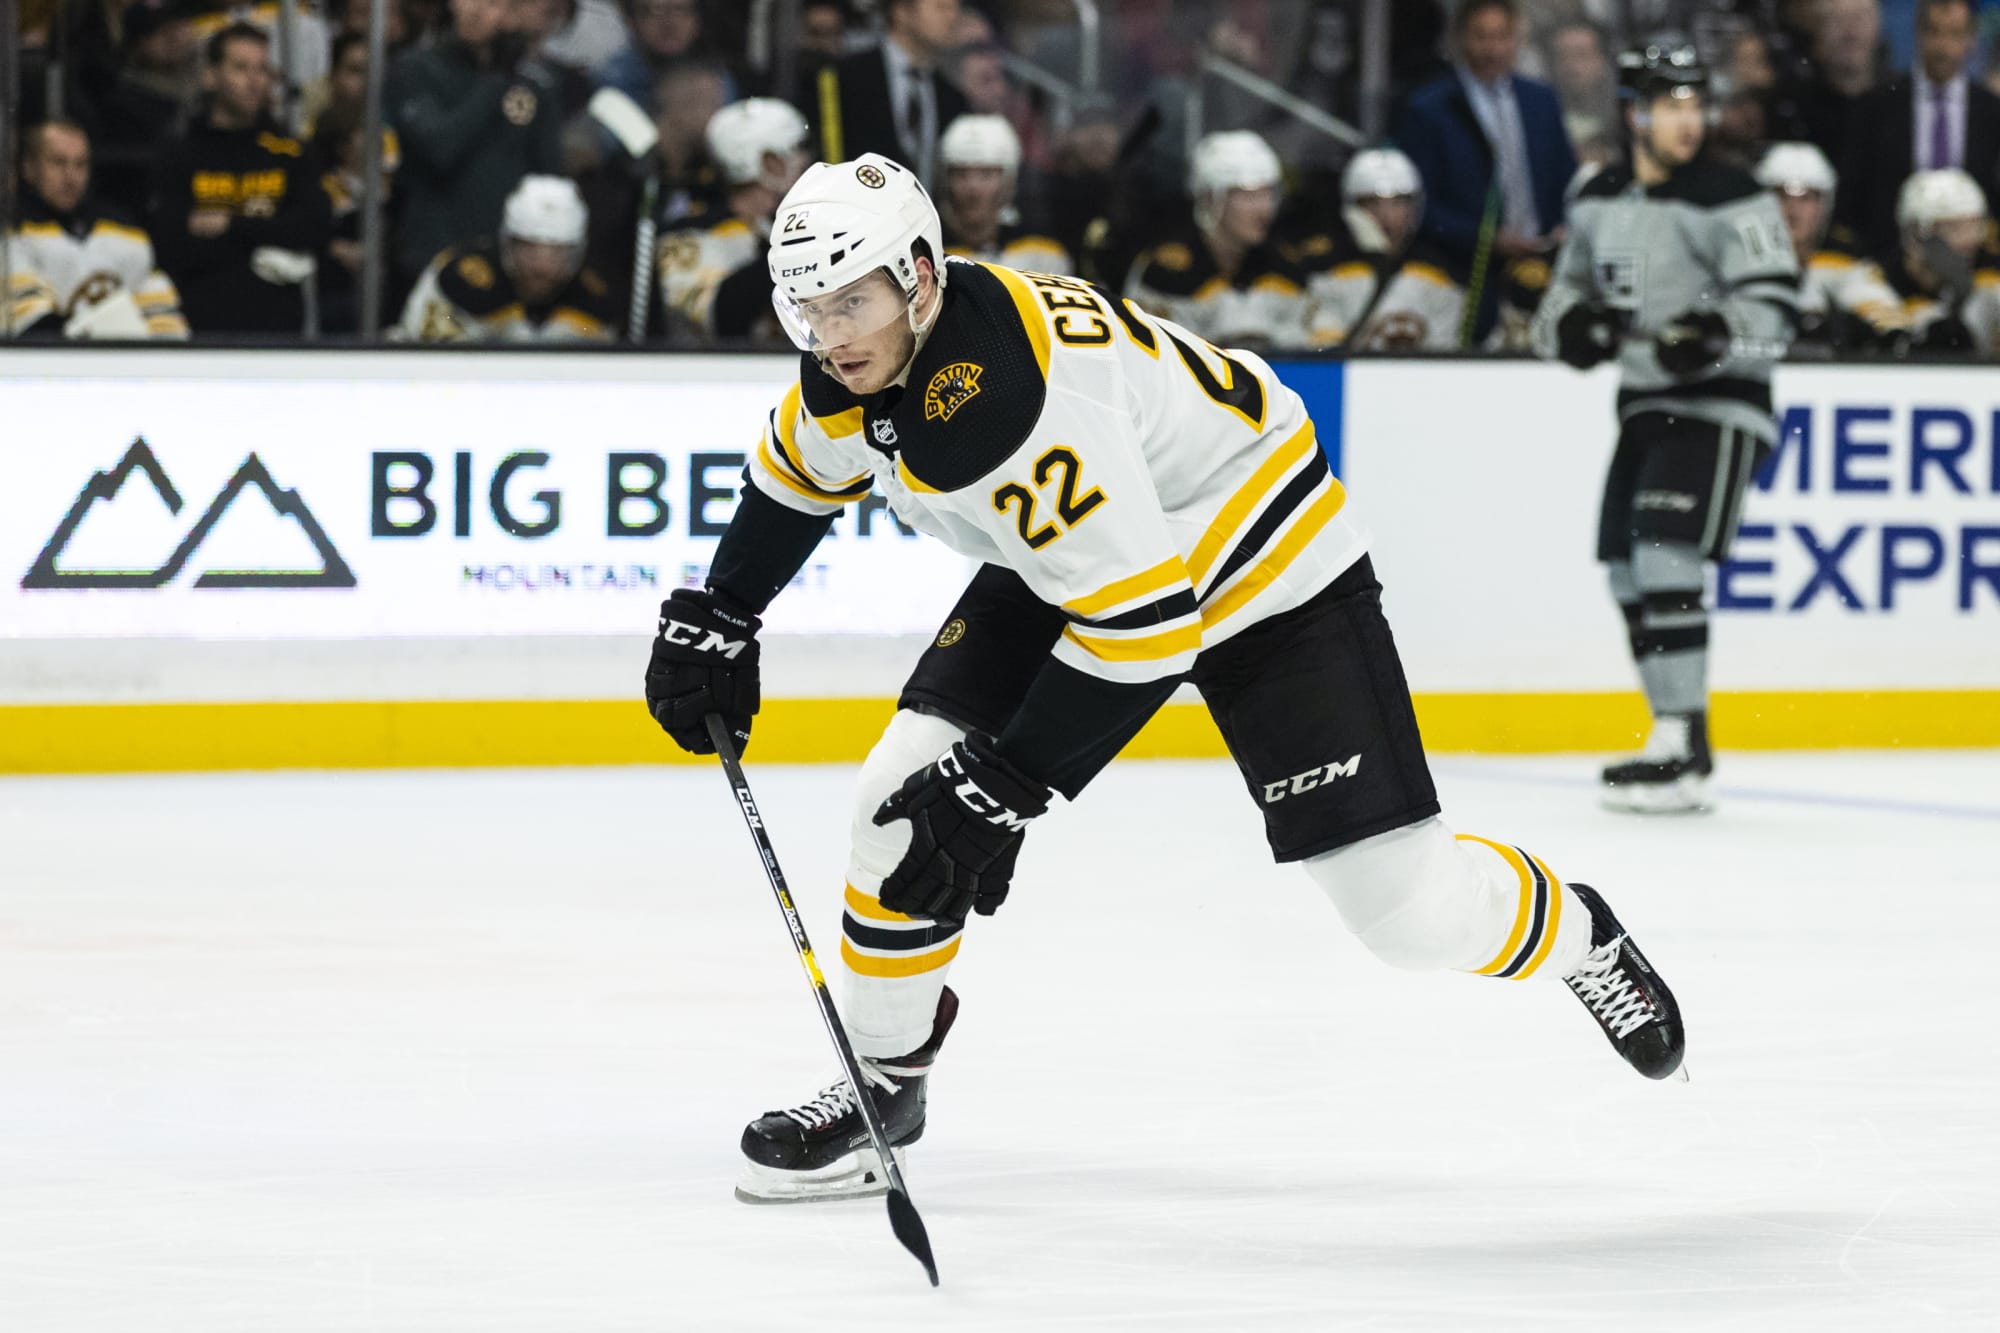 Boston Bruins: Peter Cehlarik ready for an injury-free campaign